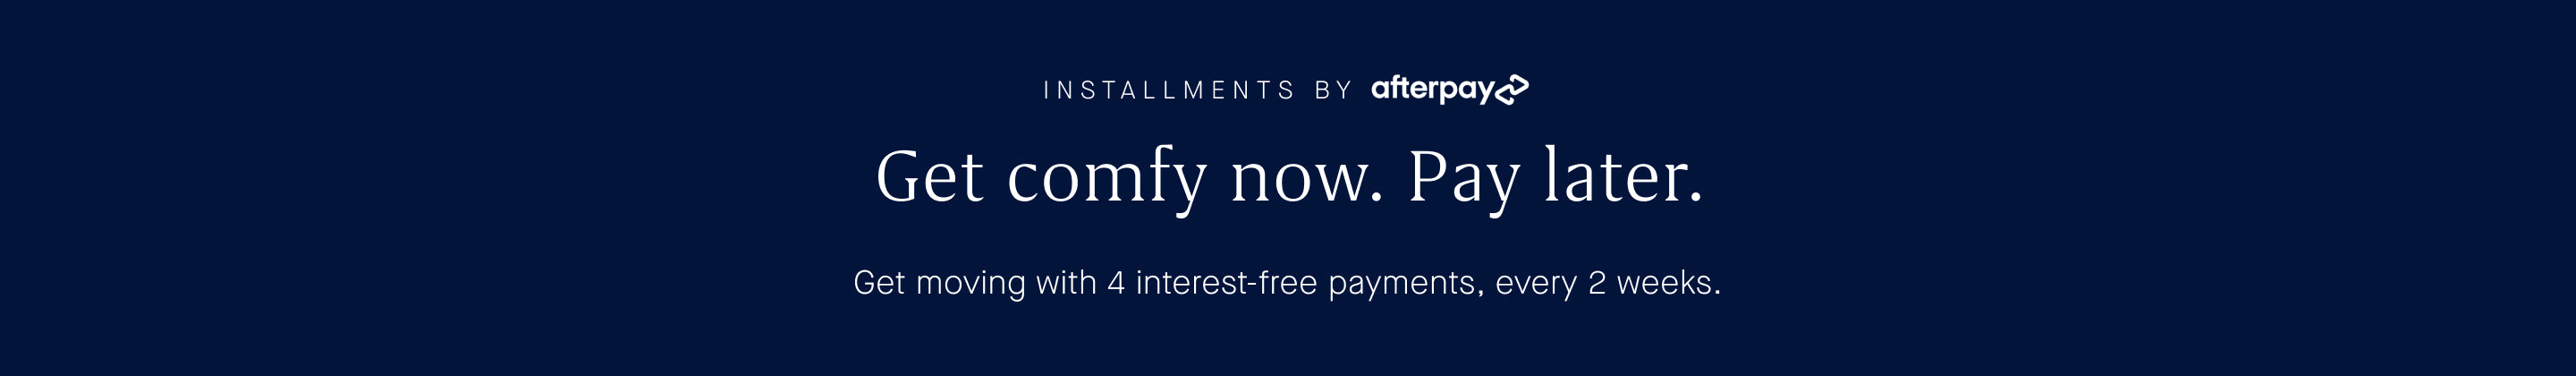 Installments by Afterpay. Get comfy now. Pay later.  Get moving with 4 interest-free payments, every 2 weeks.